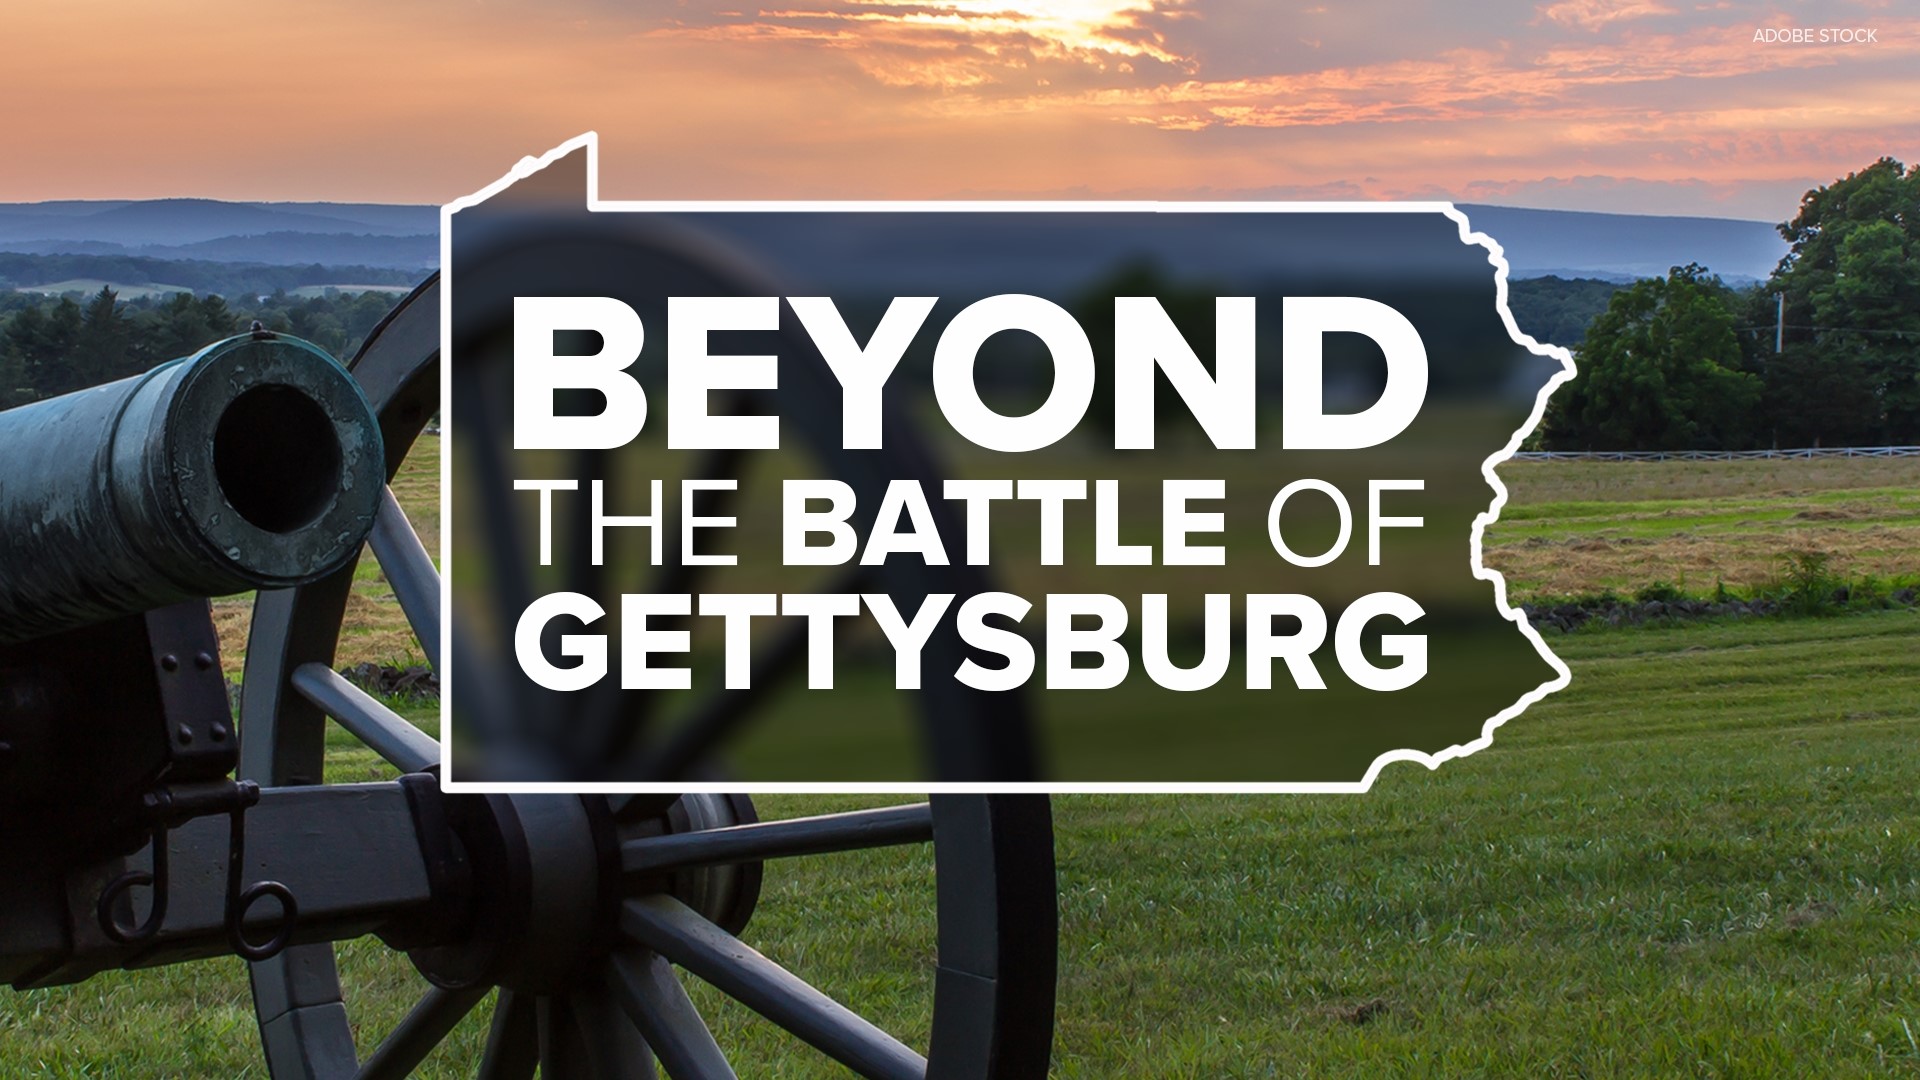 This series takes a look at the other historic battles of the Civil War across Central Pennsylvania, beyond the Battle of Gettysburg.